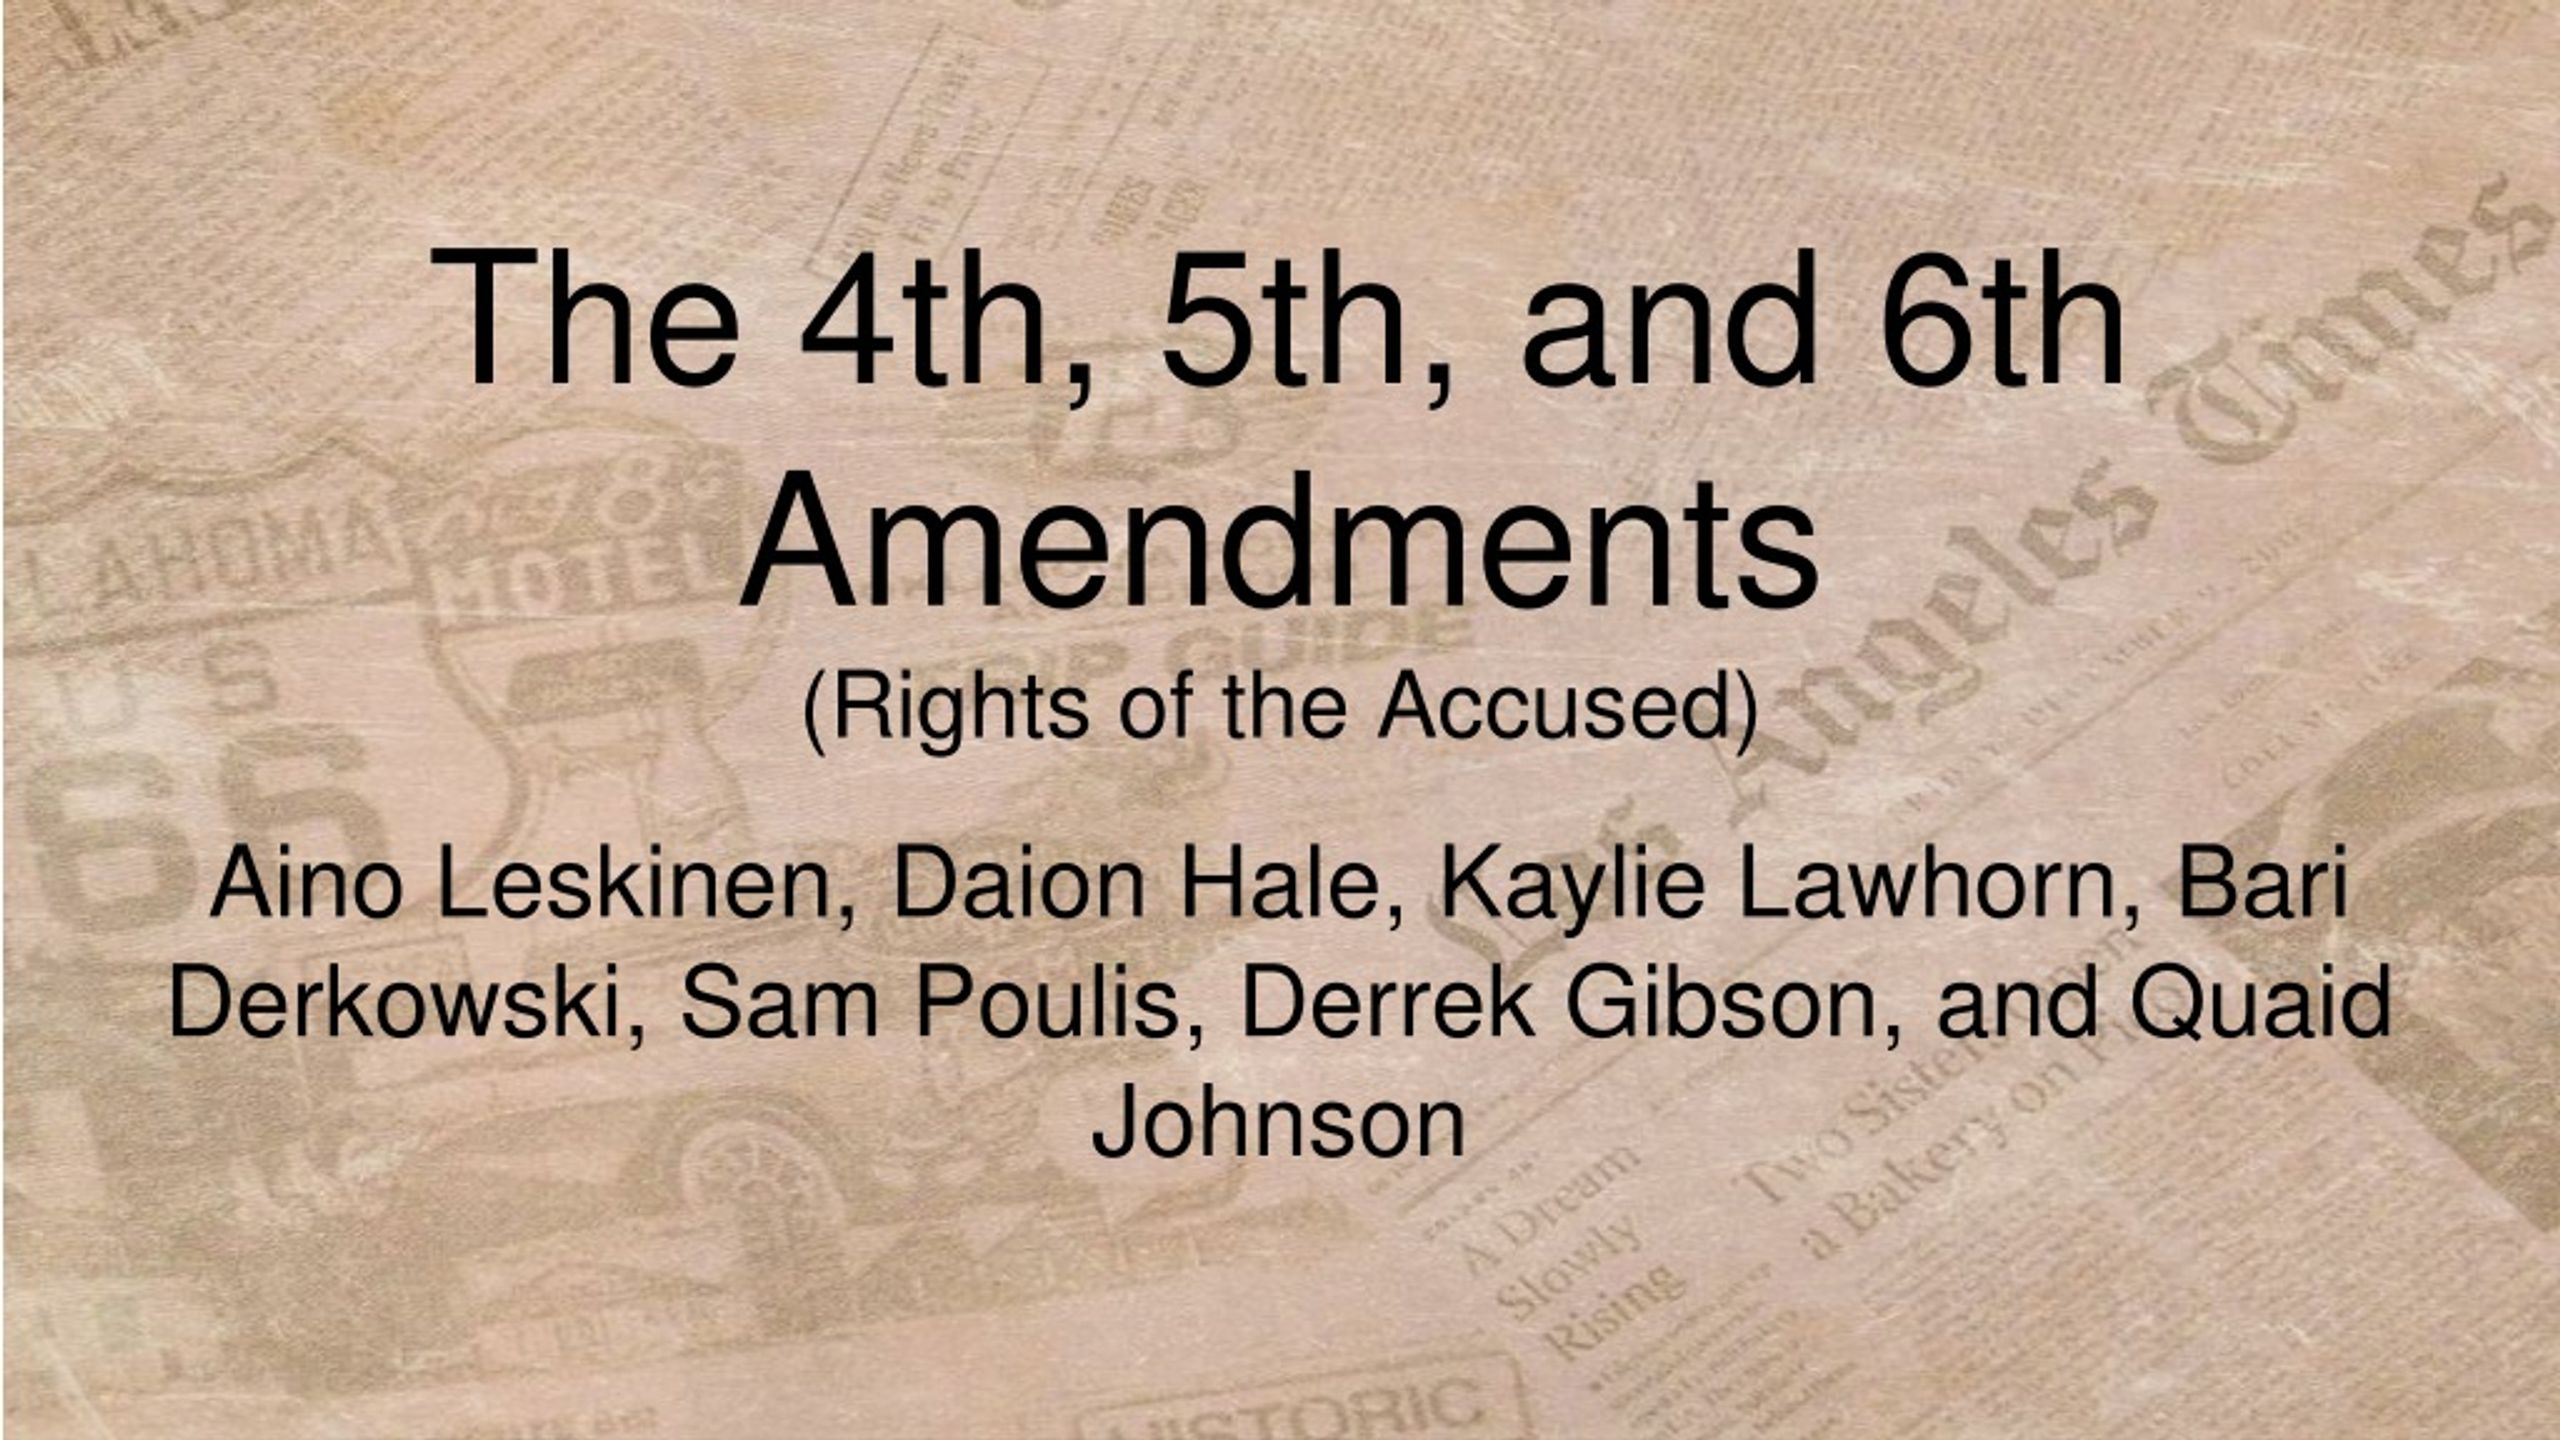 Ppt The 4th 5th And 6th Amendments Rights Of The Accused Powerpoint Presentation Id